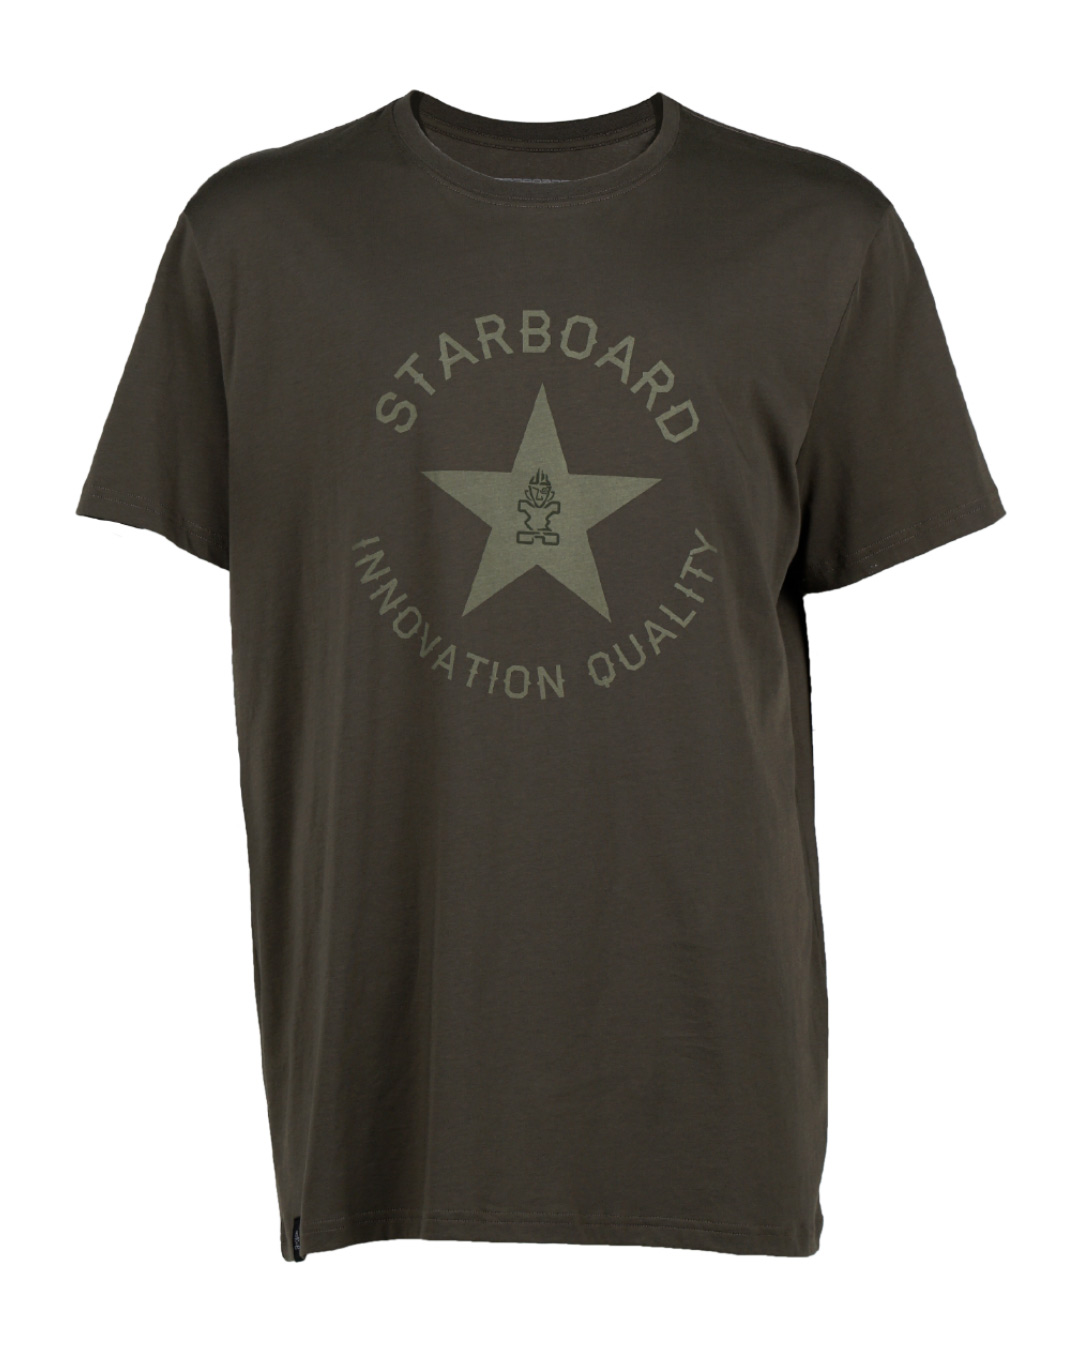 2023-Starboard-Mens-All-Star-Tee-Seaweed-Front